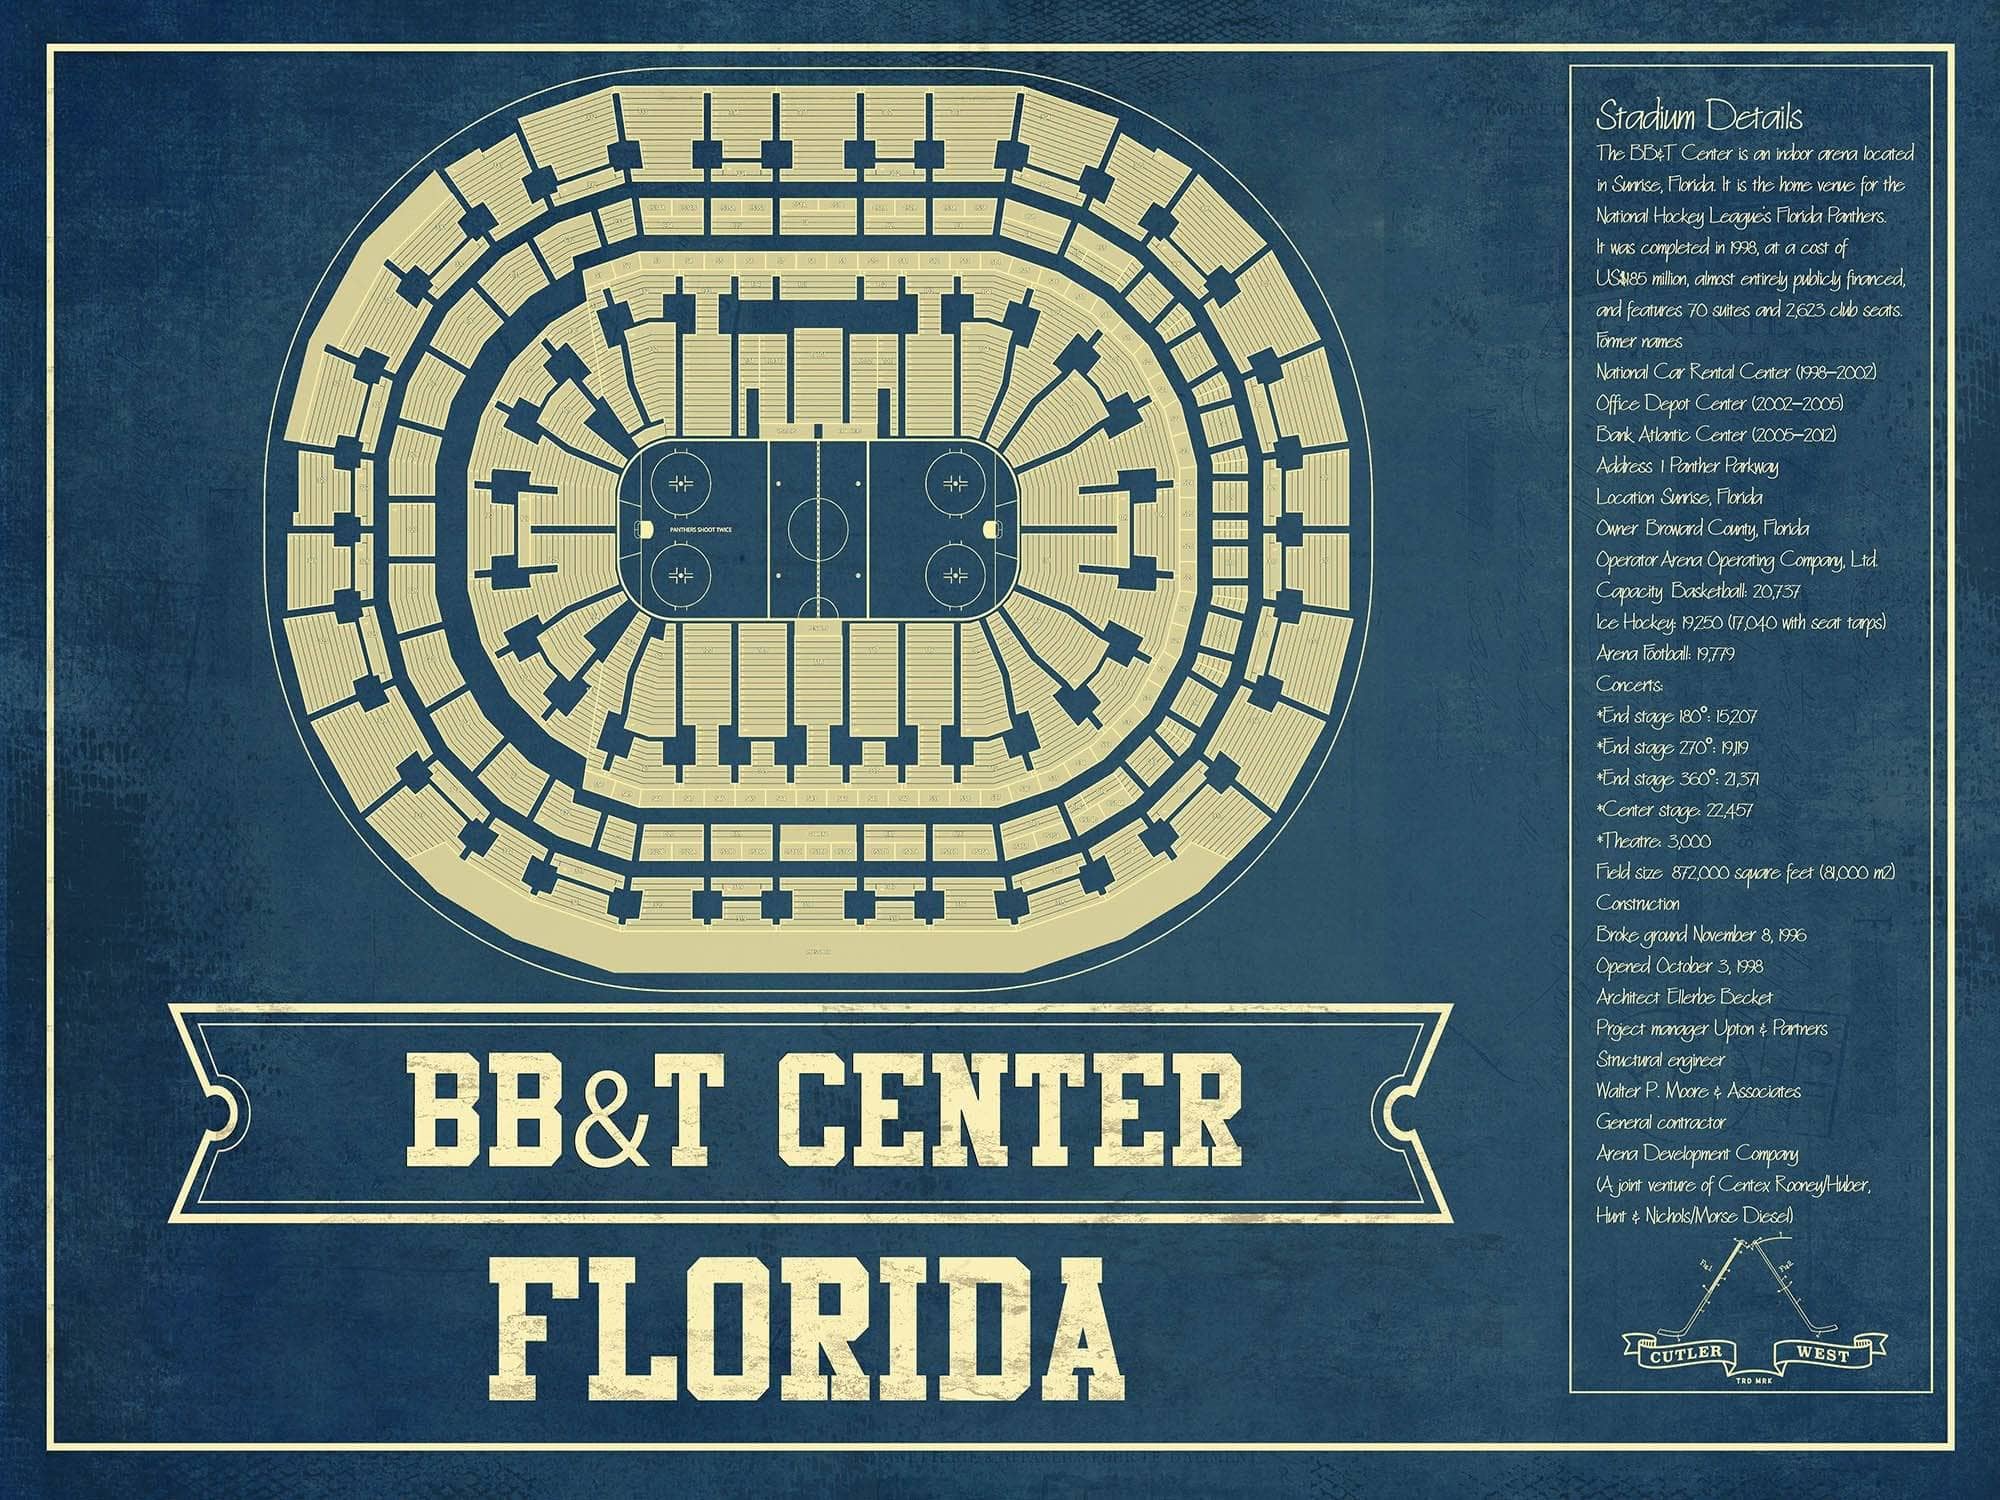 Cutler West 14" x 11" / Unframed Florida Panthers BB&T Center Seating Chart - Vintage Hockey Print 659981334_79731